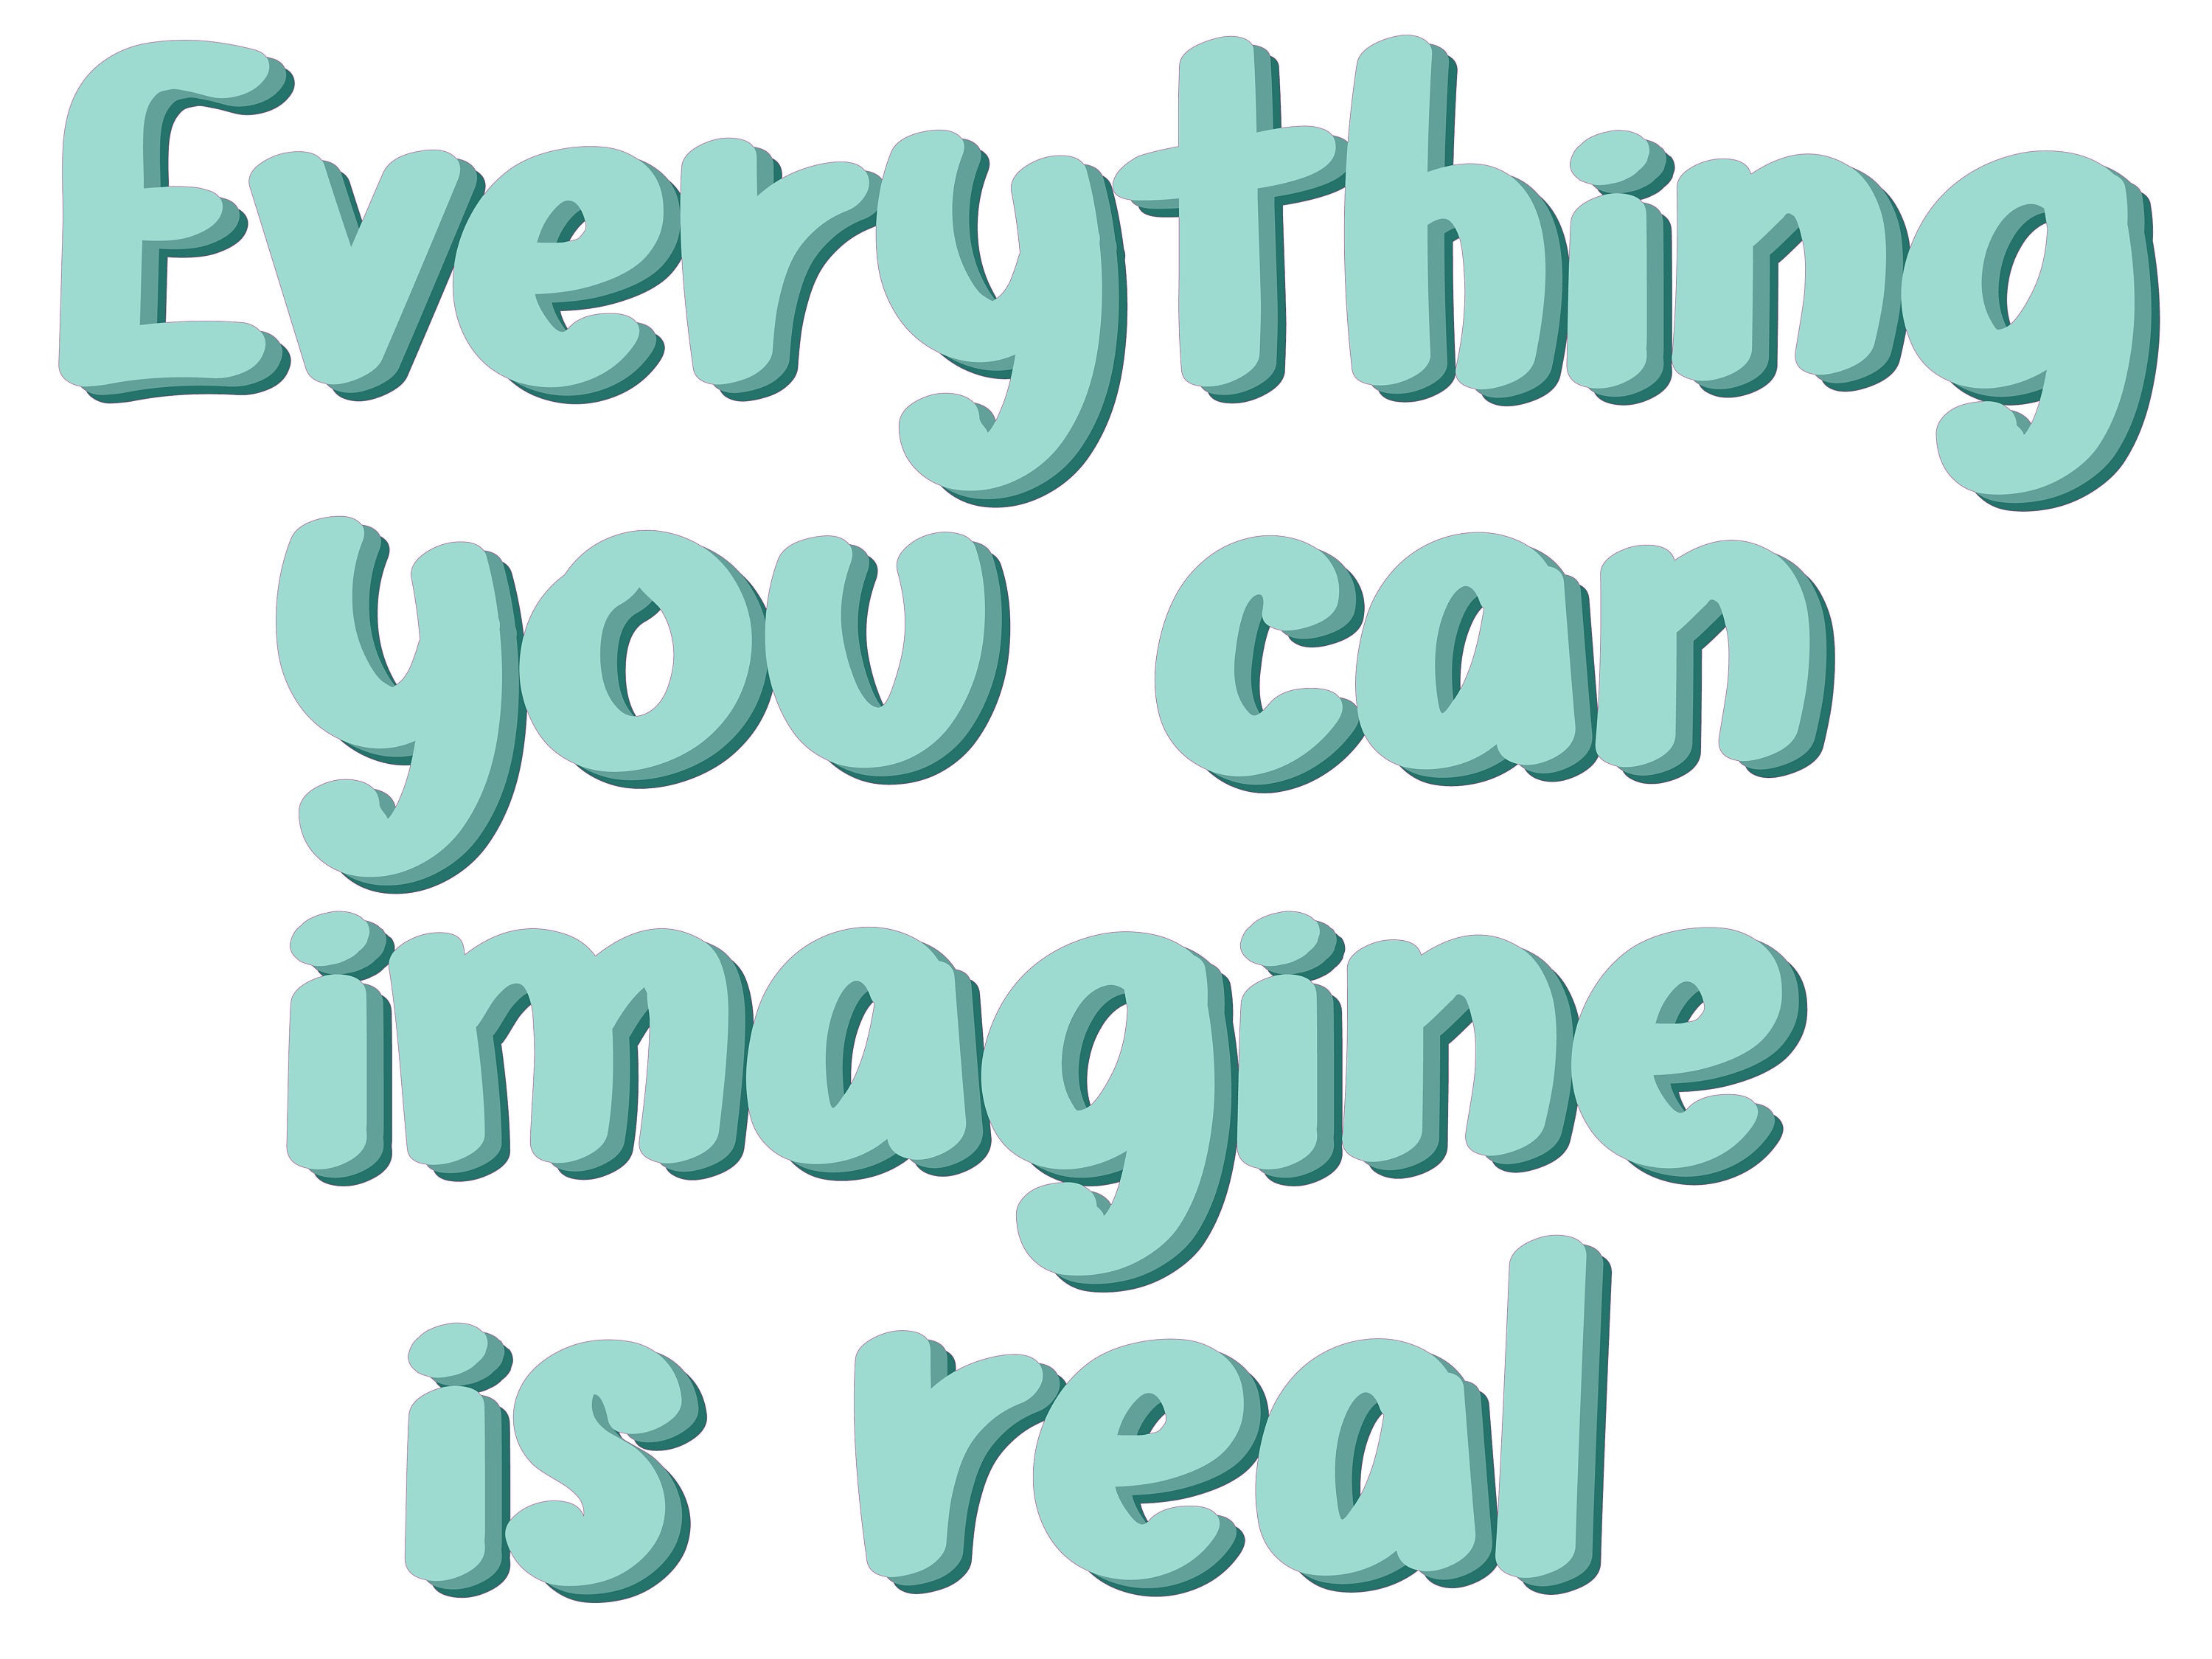 Everything you can imagine is real Pablo Picasso' Sticker